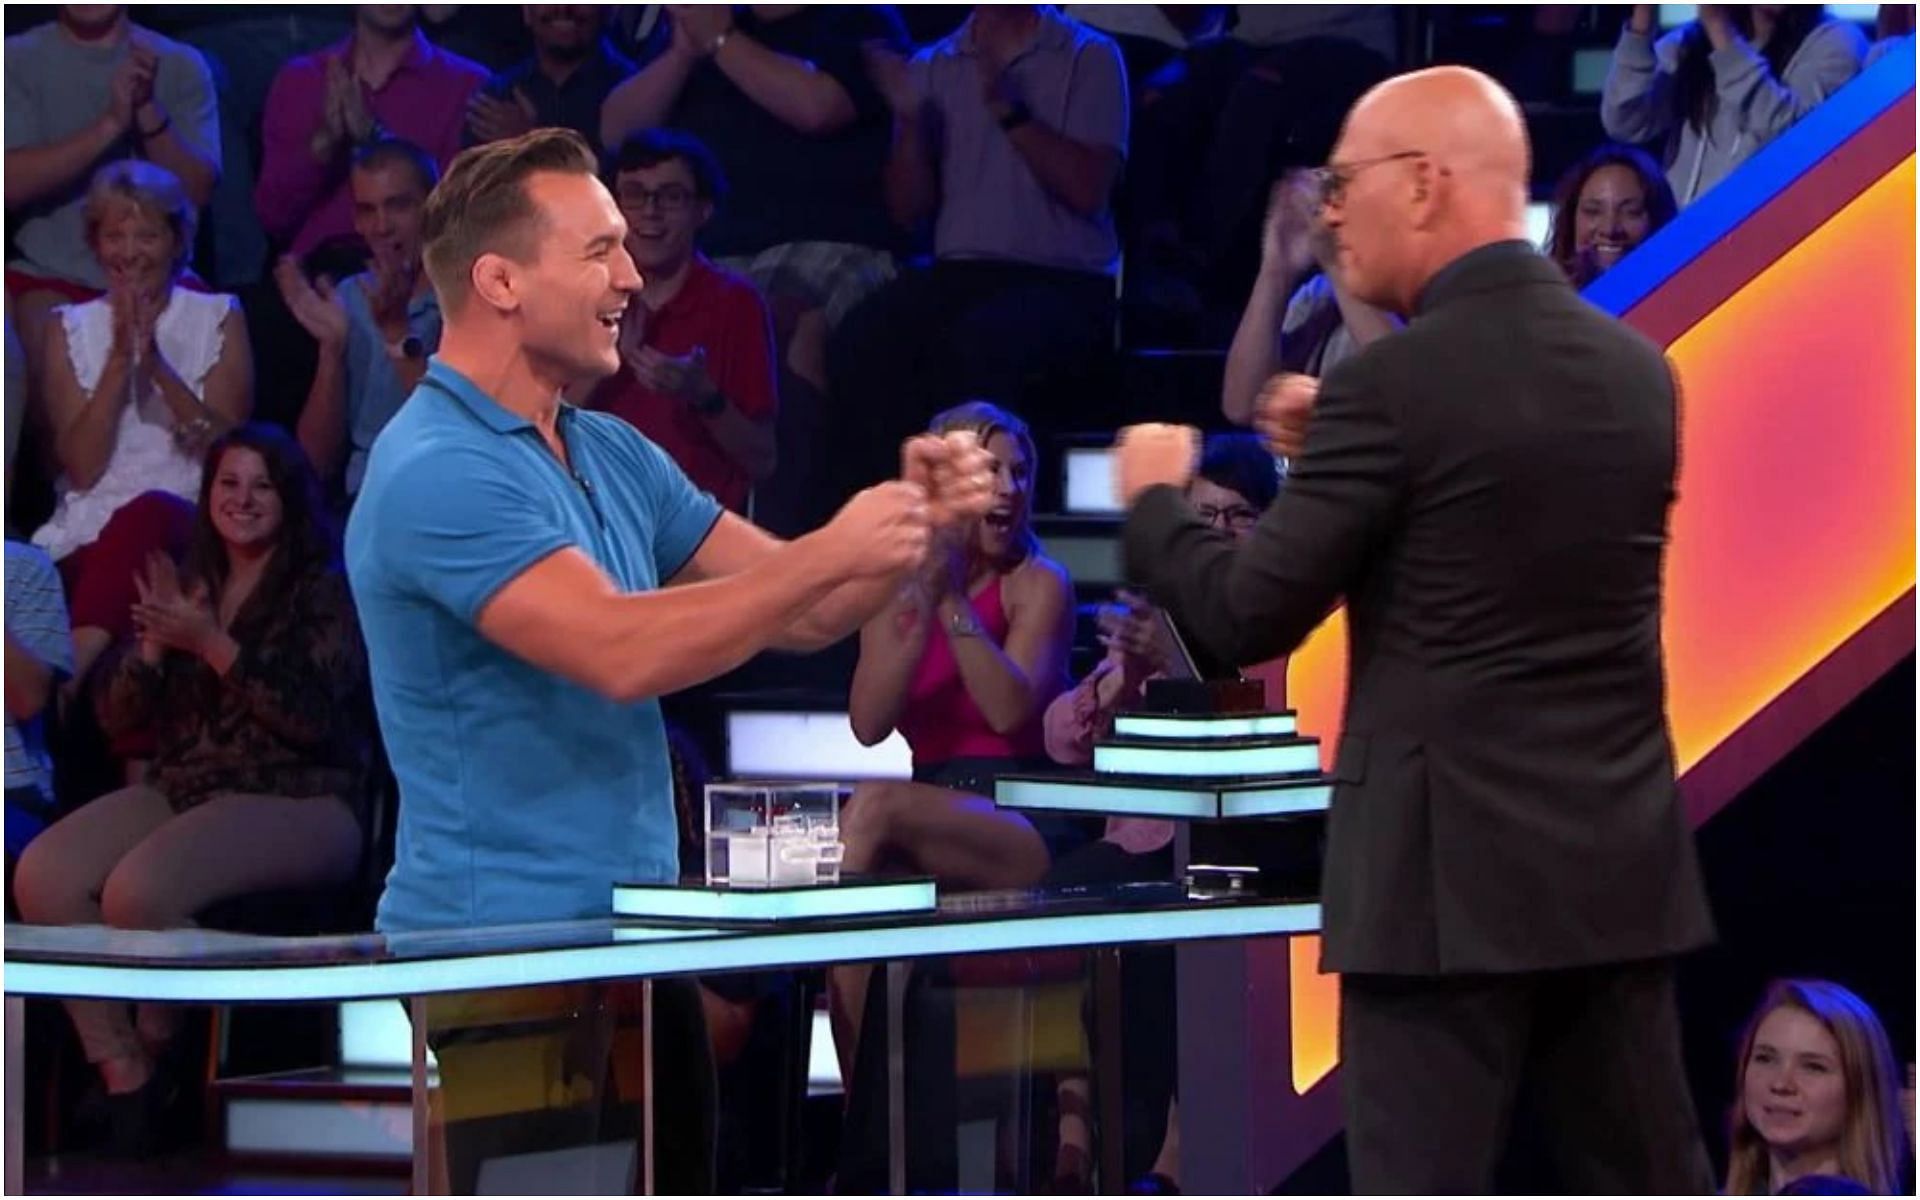 Michael Chandler at Deal or No Deal